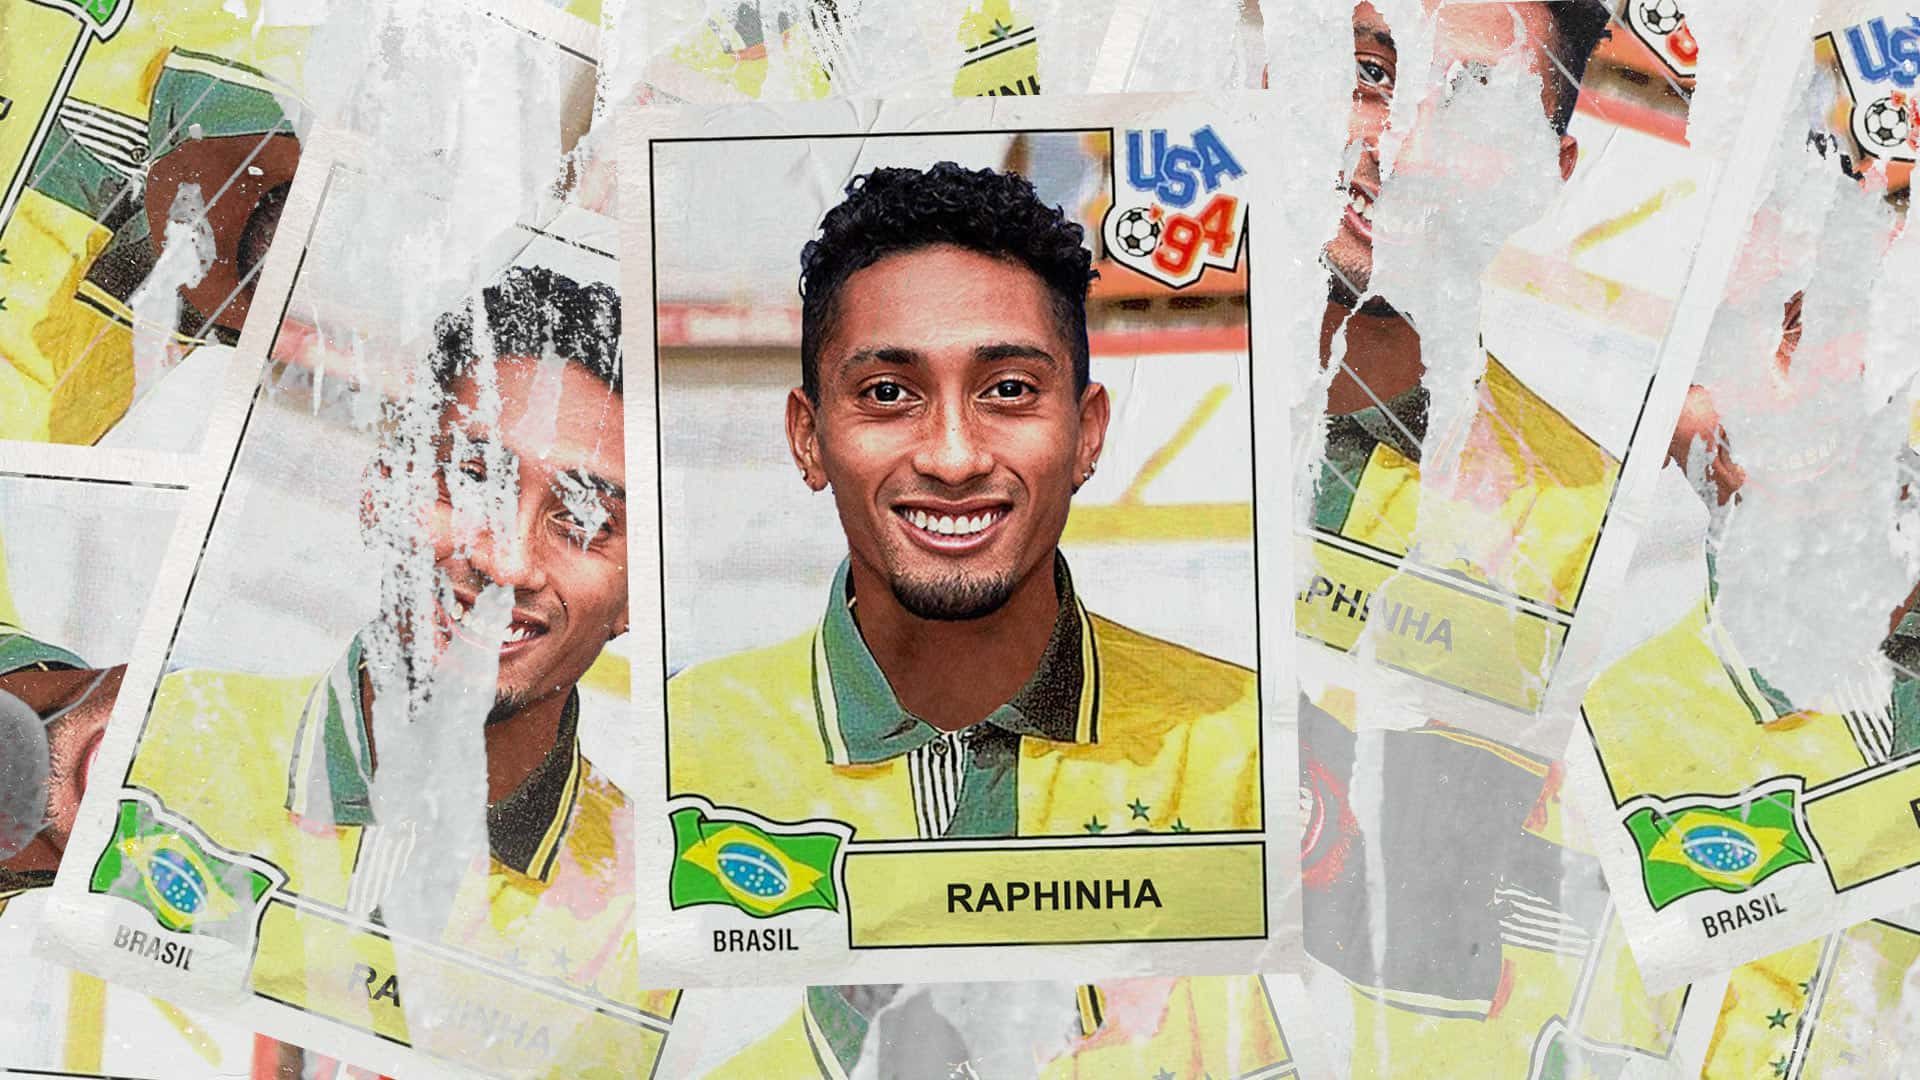 We've put Raphinha's head into a USA '94 sticker of a Brazil player cos it's cool